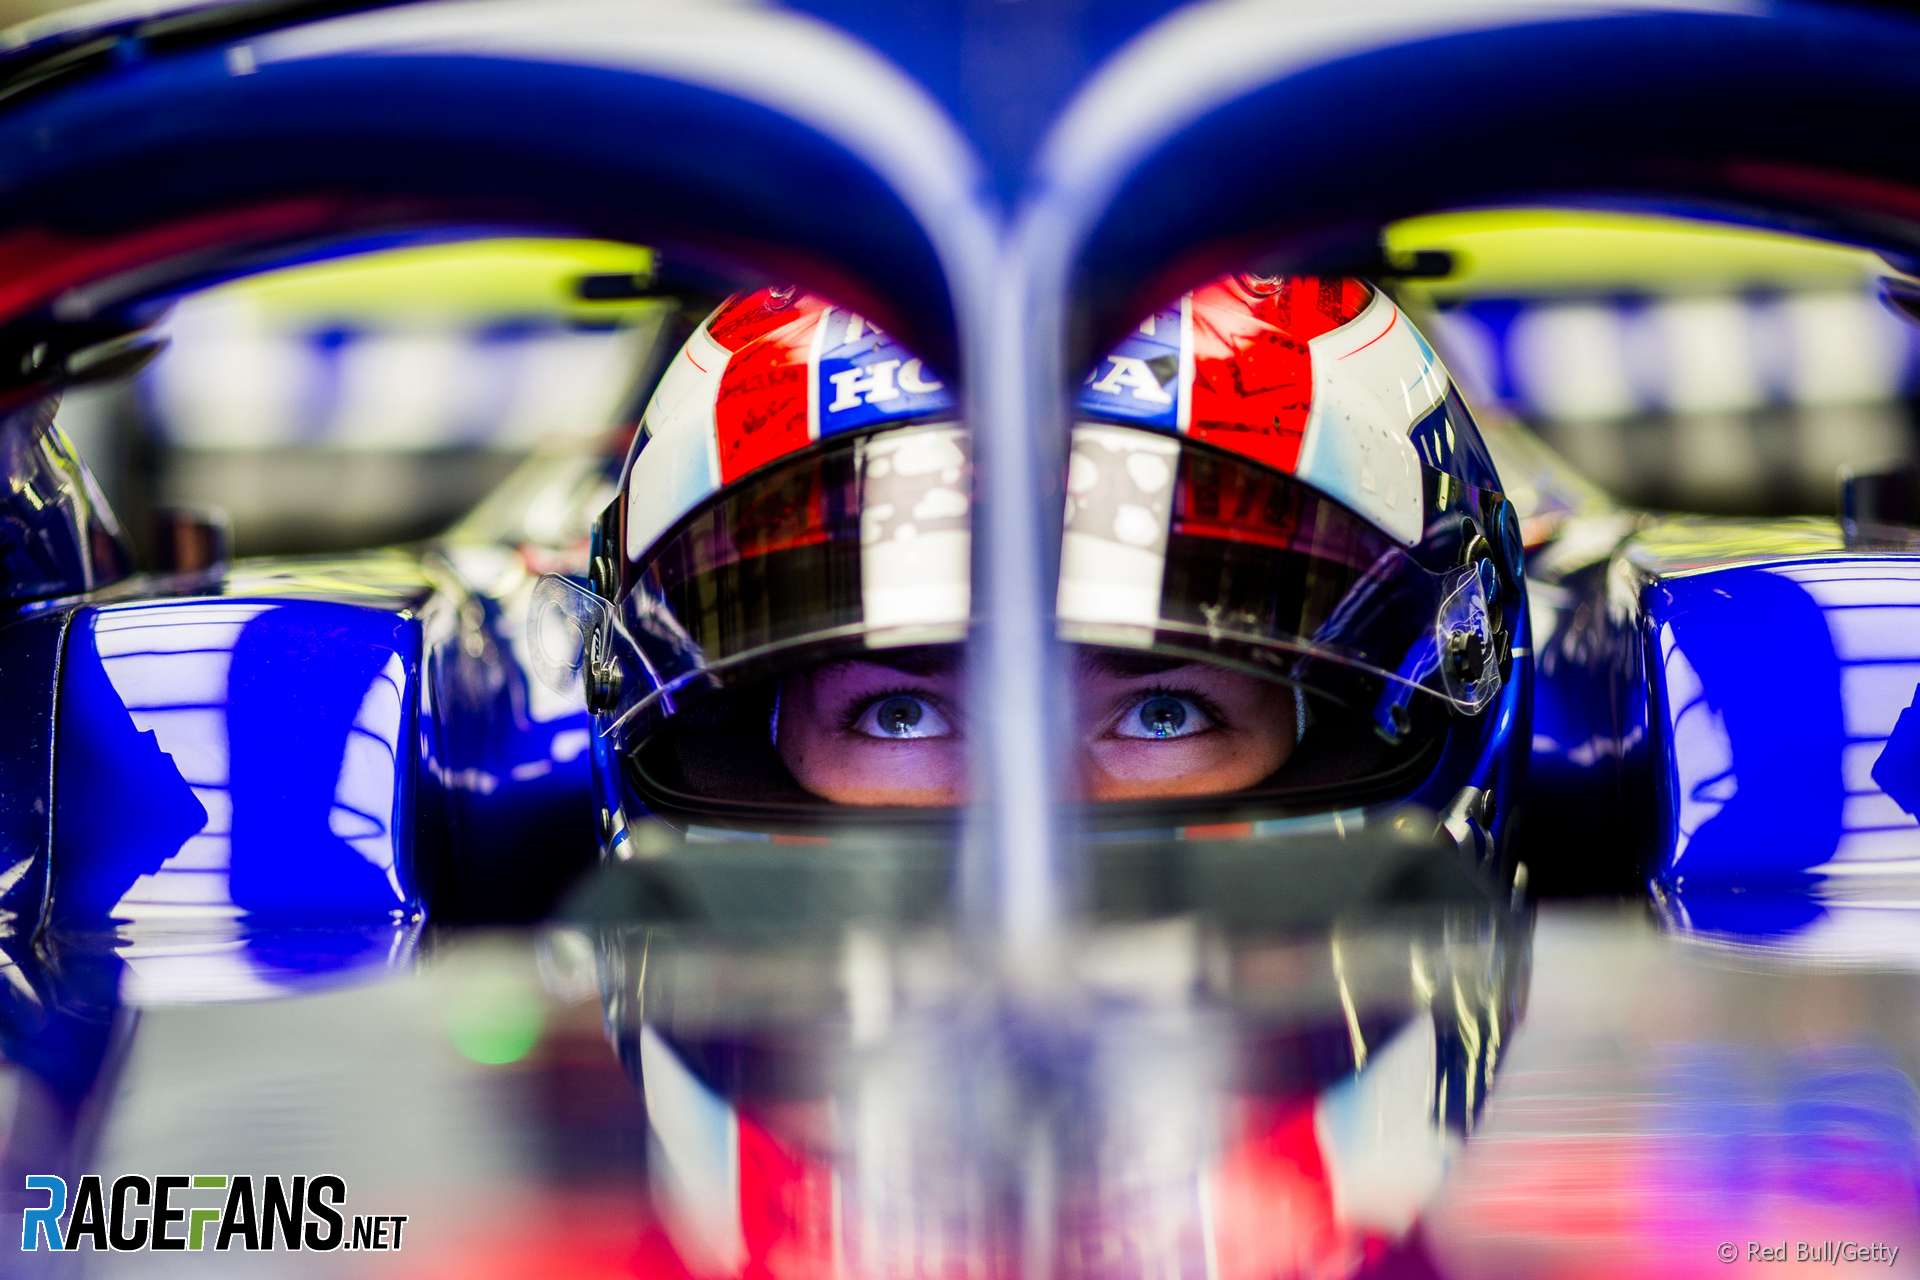 Pierre Gasly, Toro Rosso, Circuit of the Americas, 2018